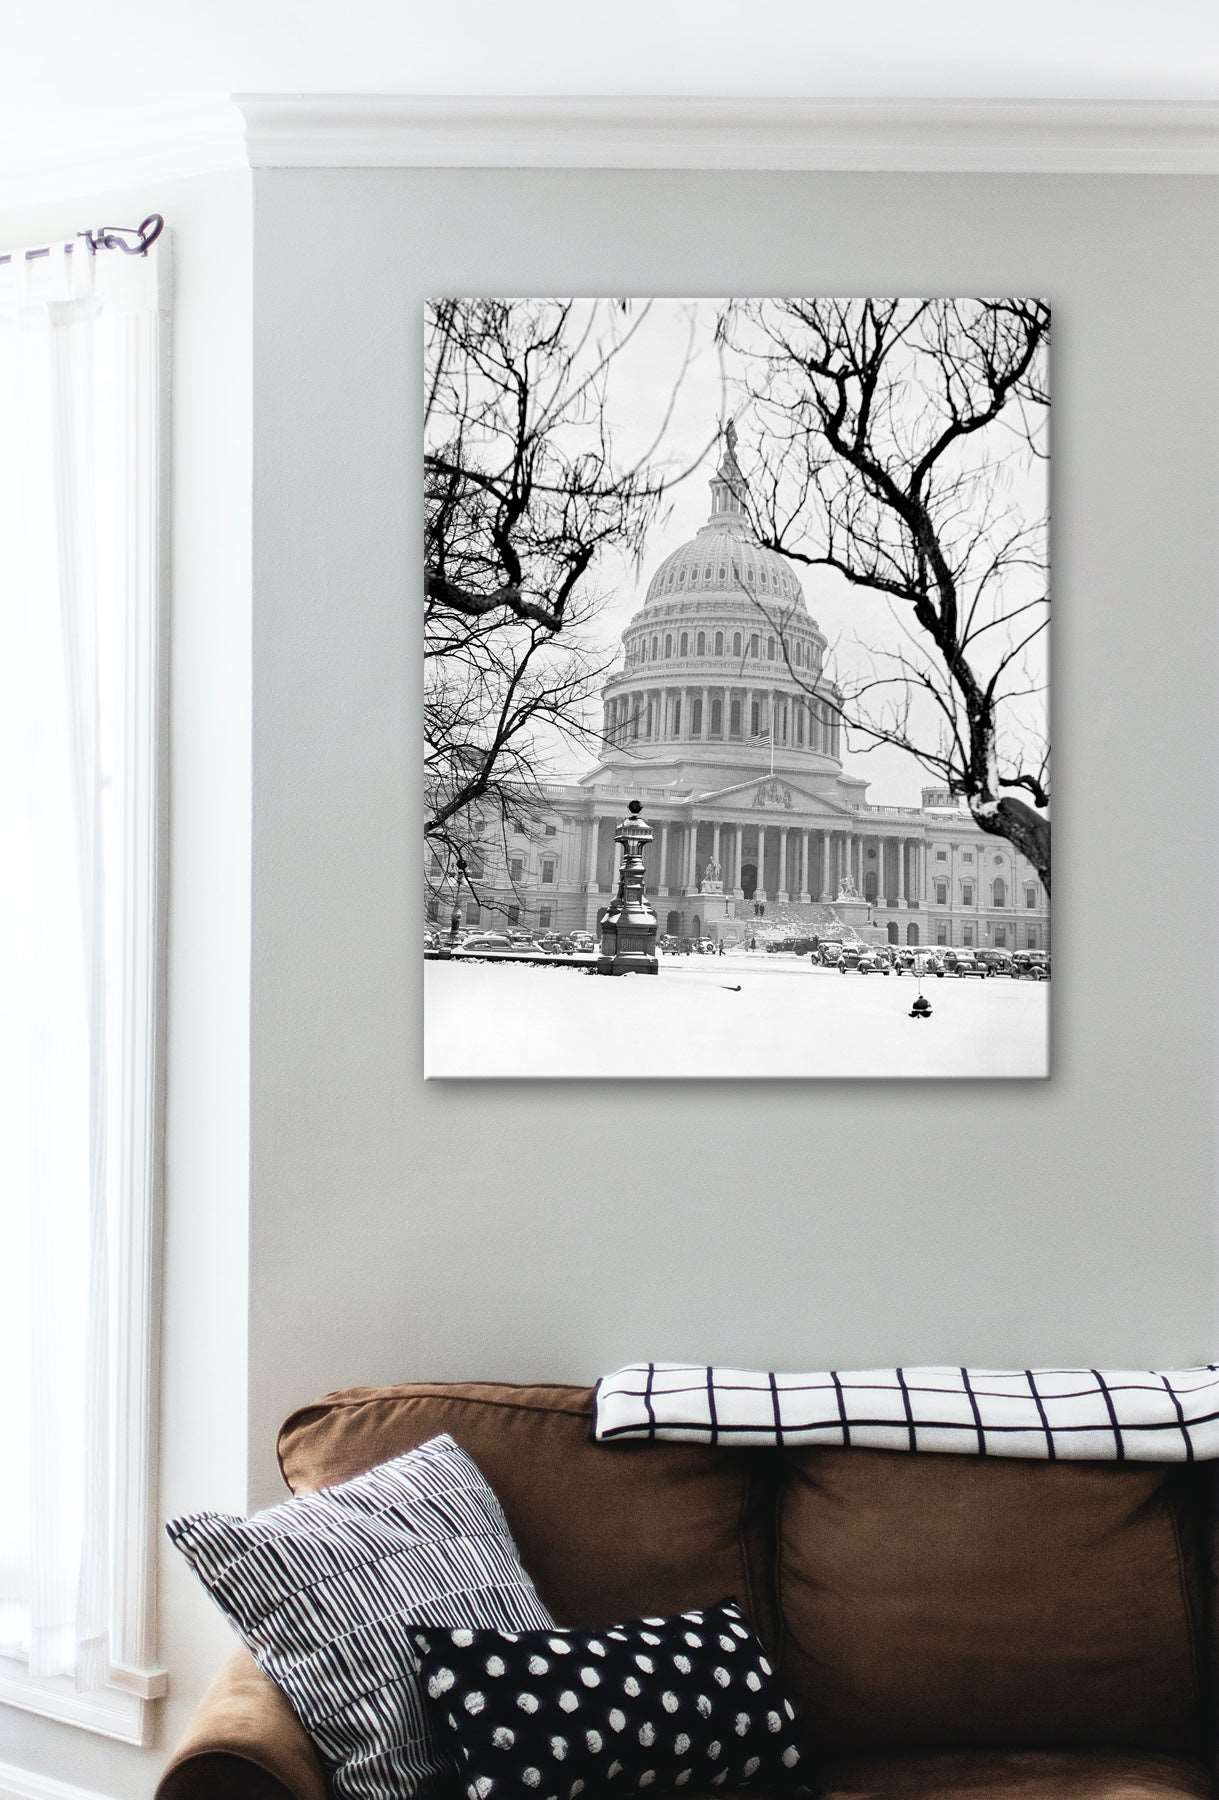 A living room wall with a canvas print of the US Capitol on the wall